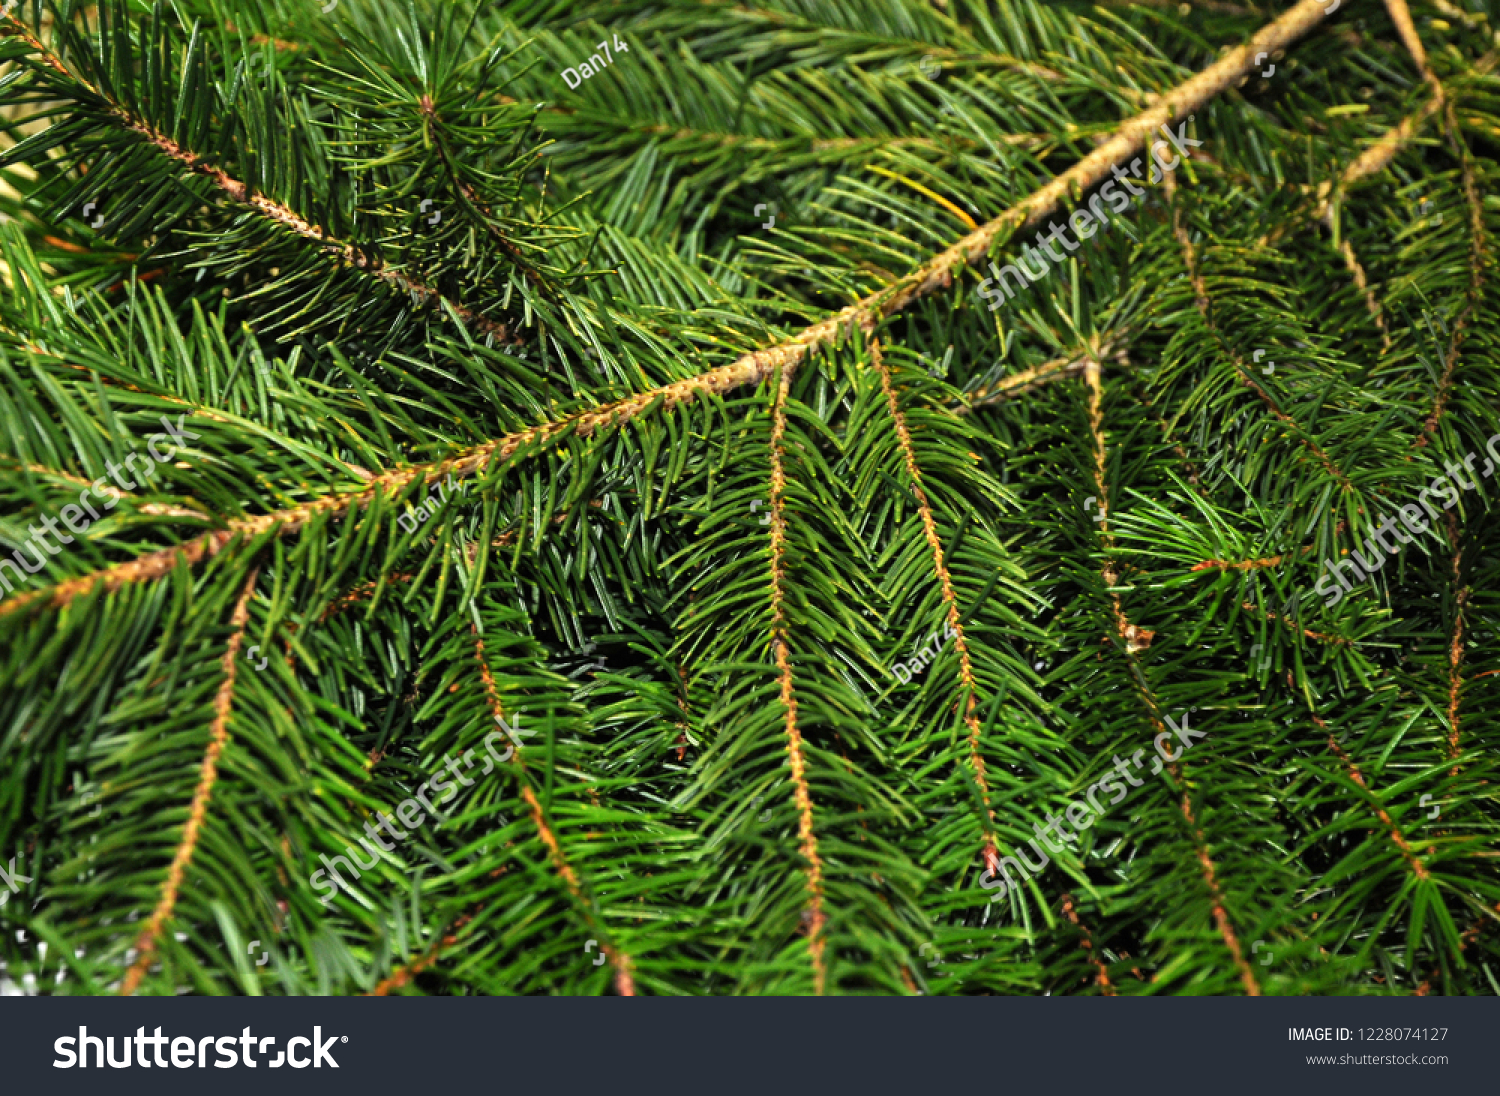 Background of green branches of fir tree.
Fir-tree. Spruce. New Year theme. #1228074127